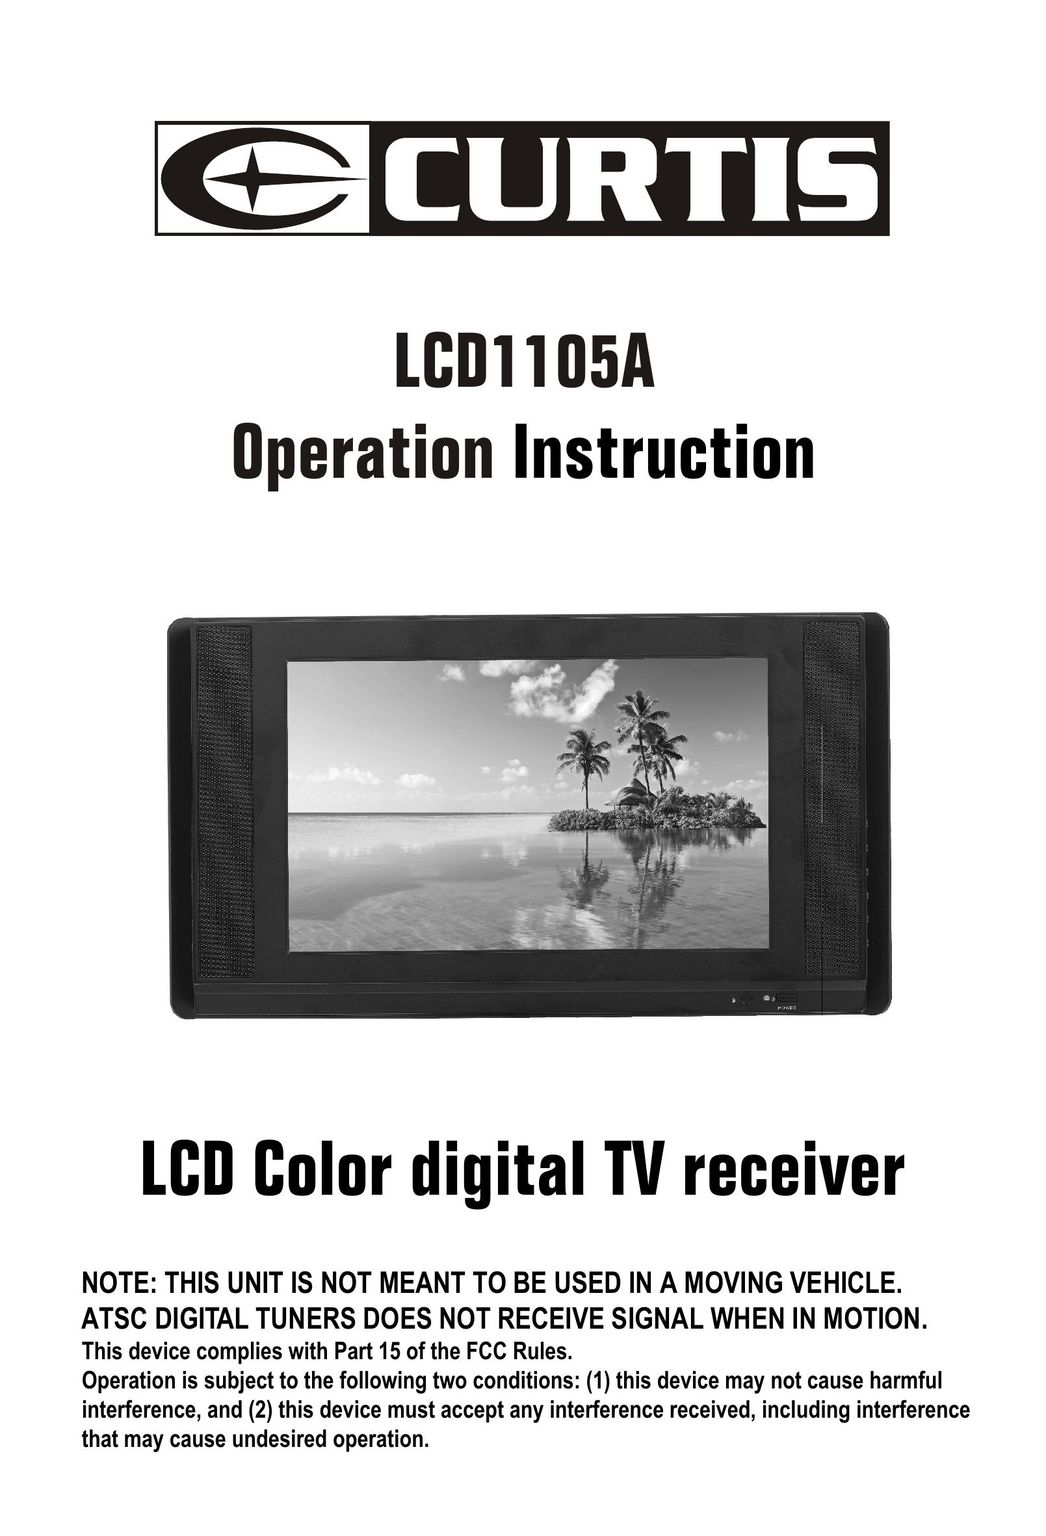 Curtis LCD1105A Flat Panel Television User Manual